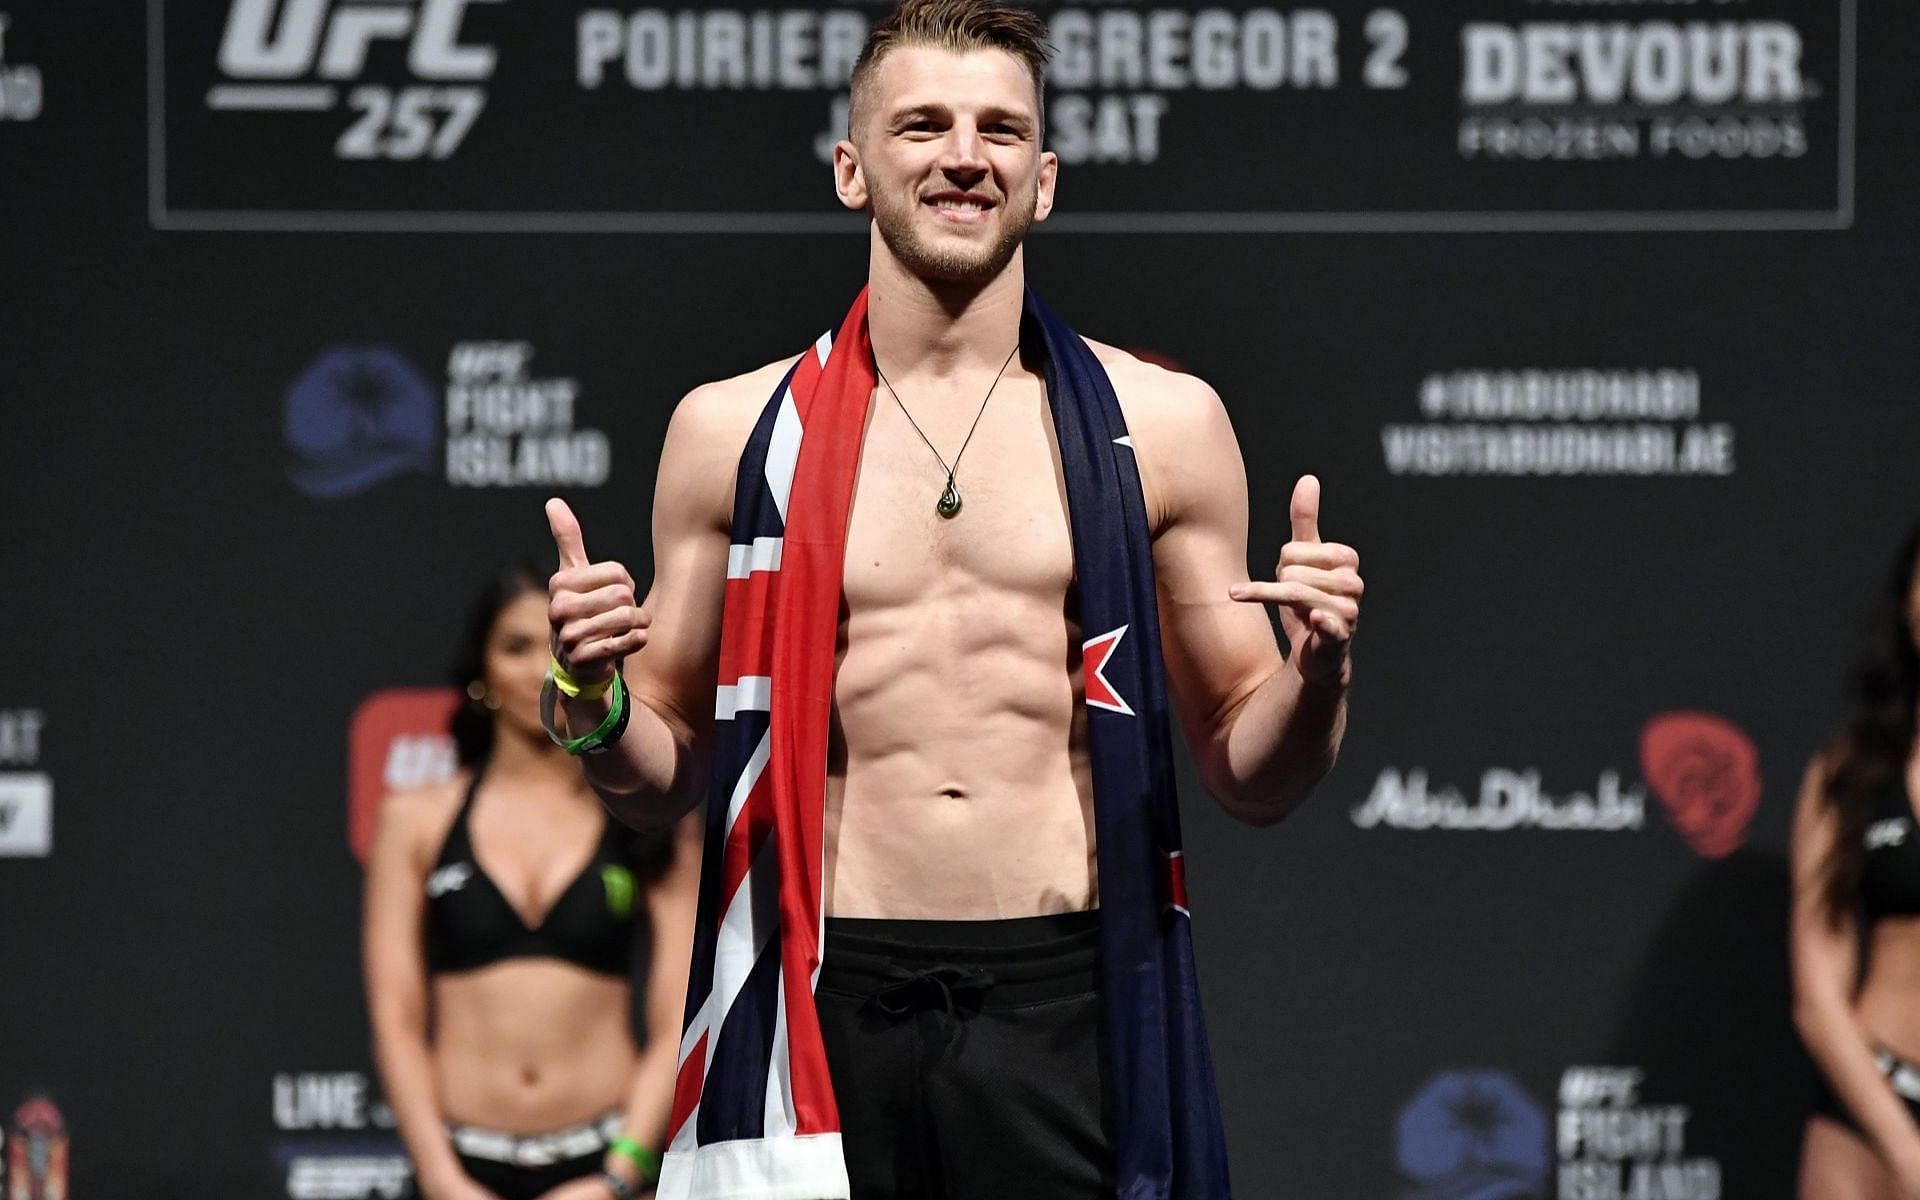 Dan Hooker has spoken about the feeling of being the &quot;gatekeeper&quot; of the UFC lightweight division